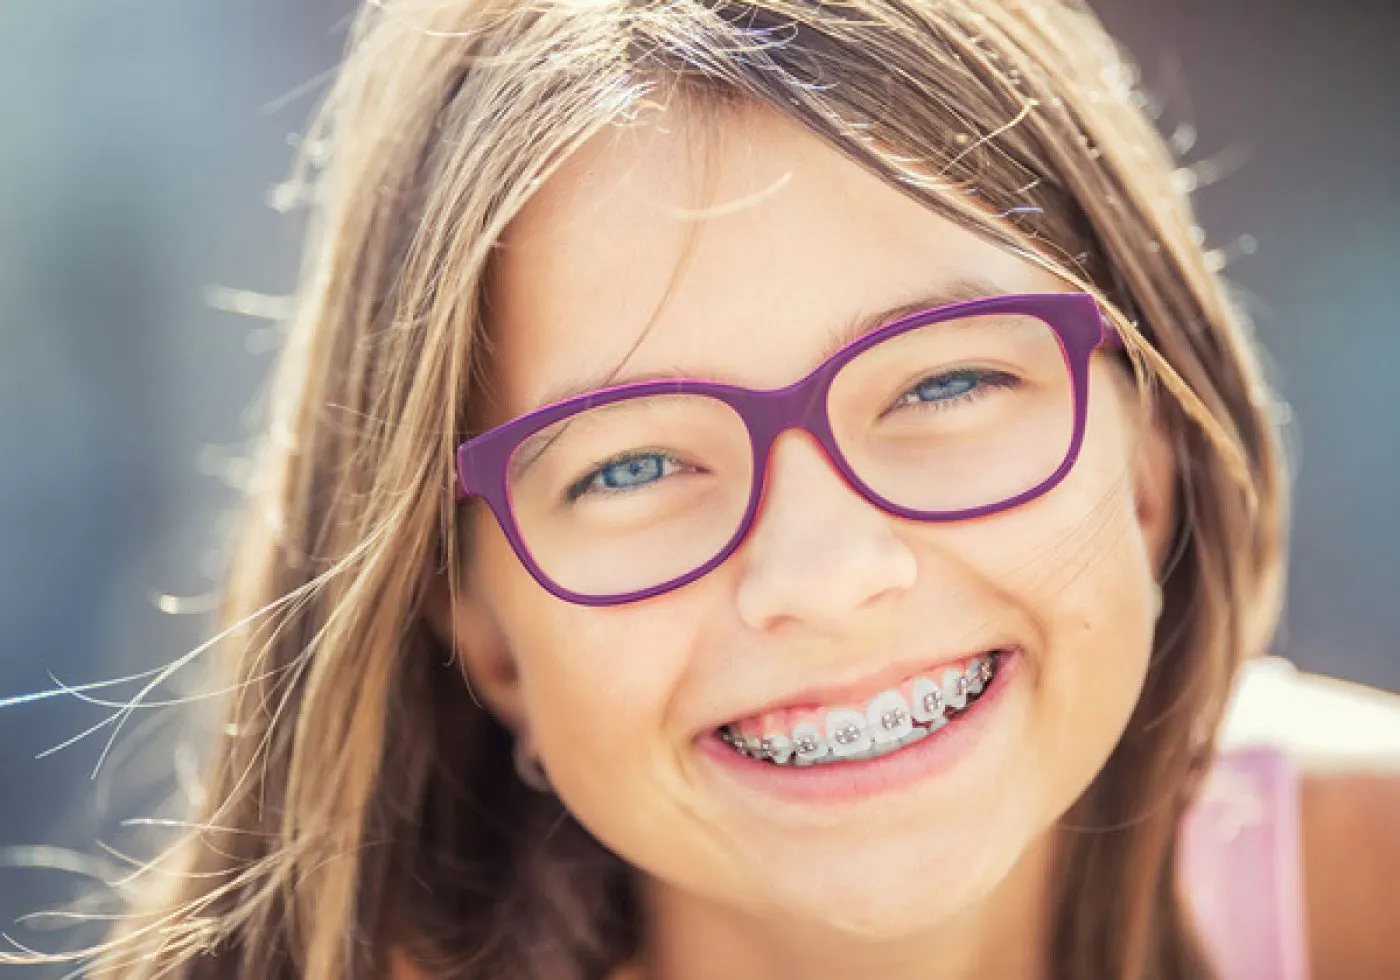 Girl With Fixed Braces